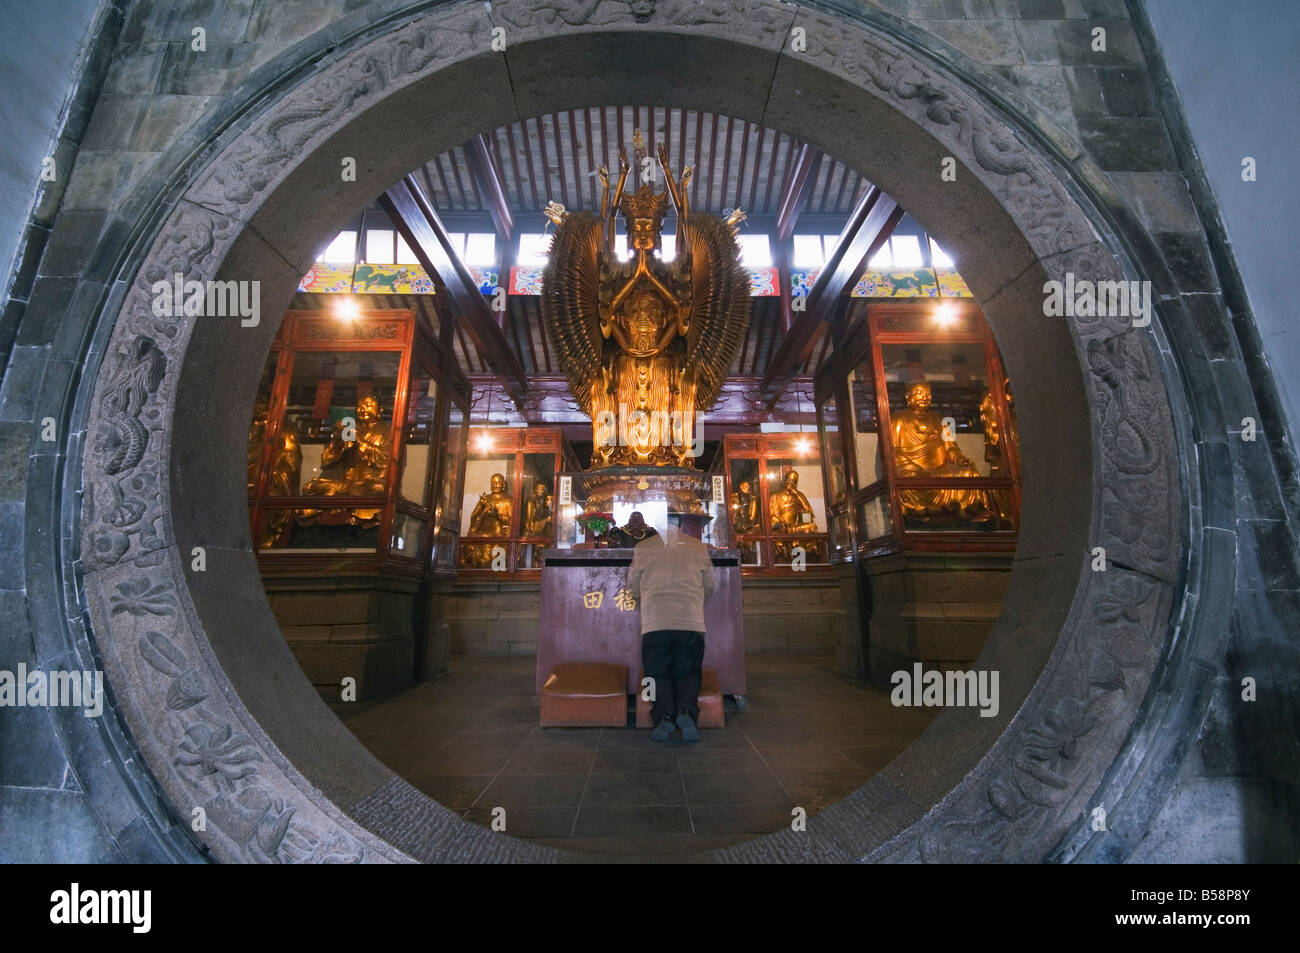 A woman praying in front of an arched entrance at West Garden Buddhist Temple, Suzhou, Jiangsu Province, China Stock Photo